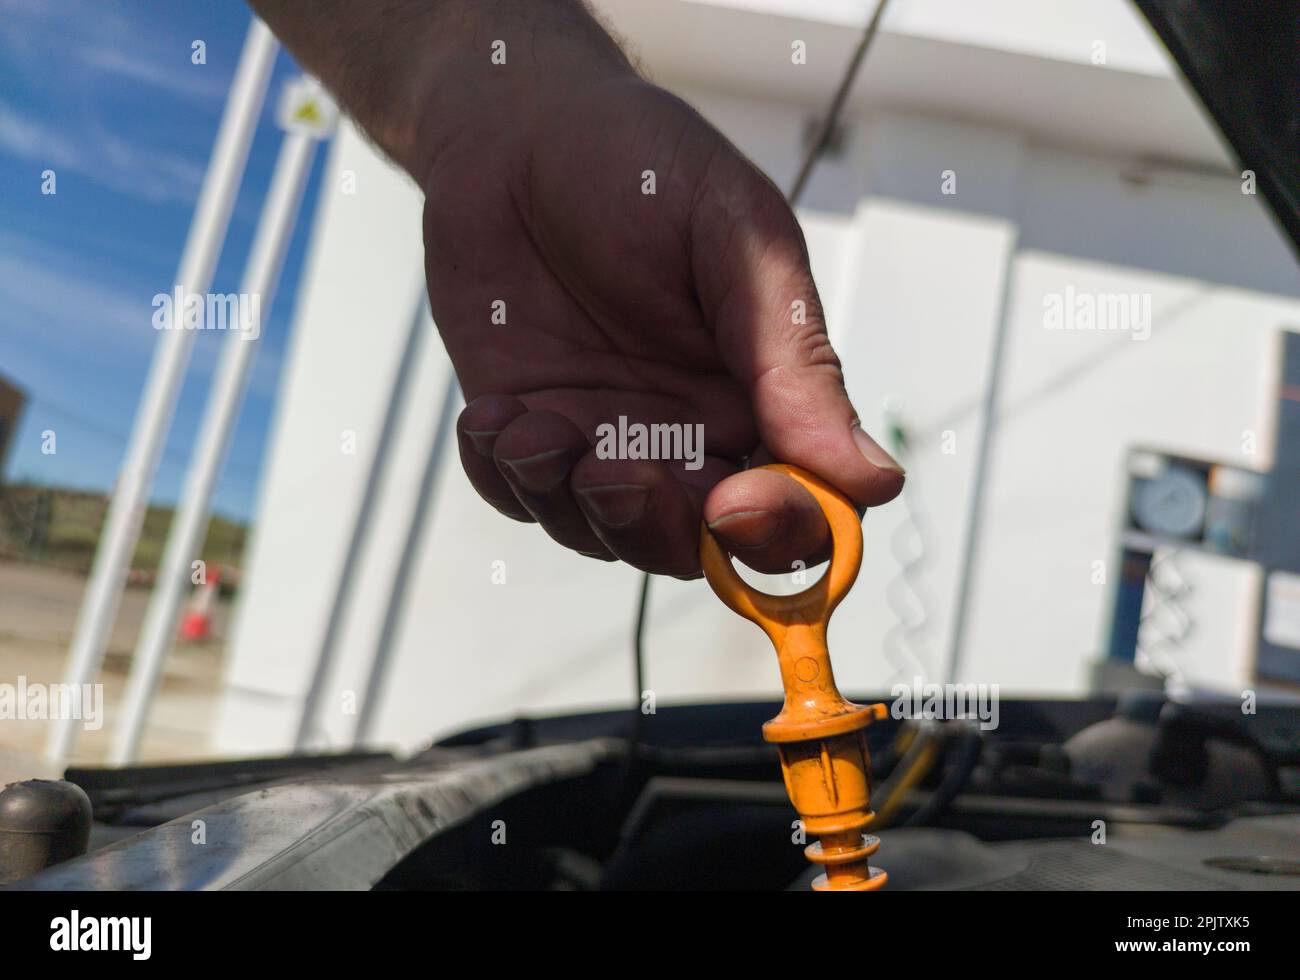 Man checking his oil level from old diesel engine. Petrol station background Stock Photo